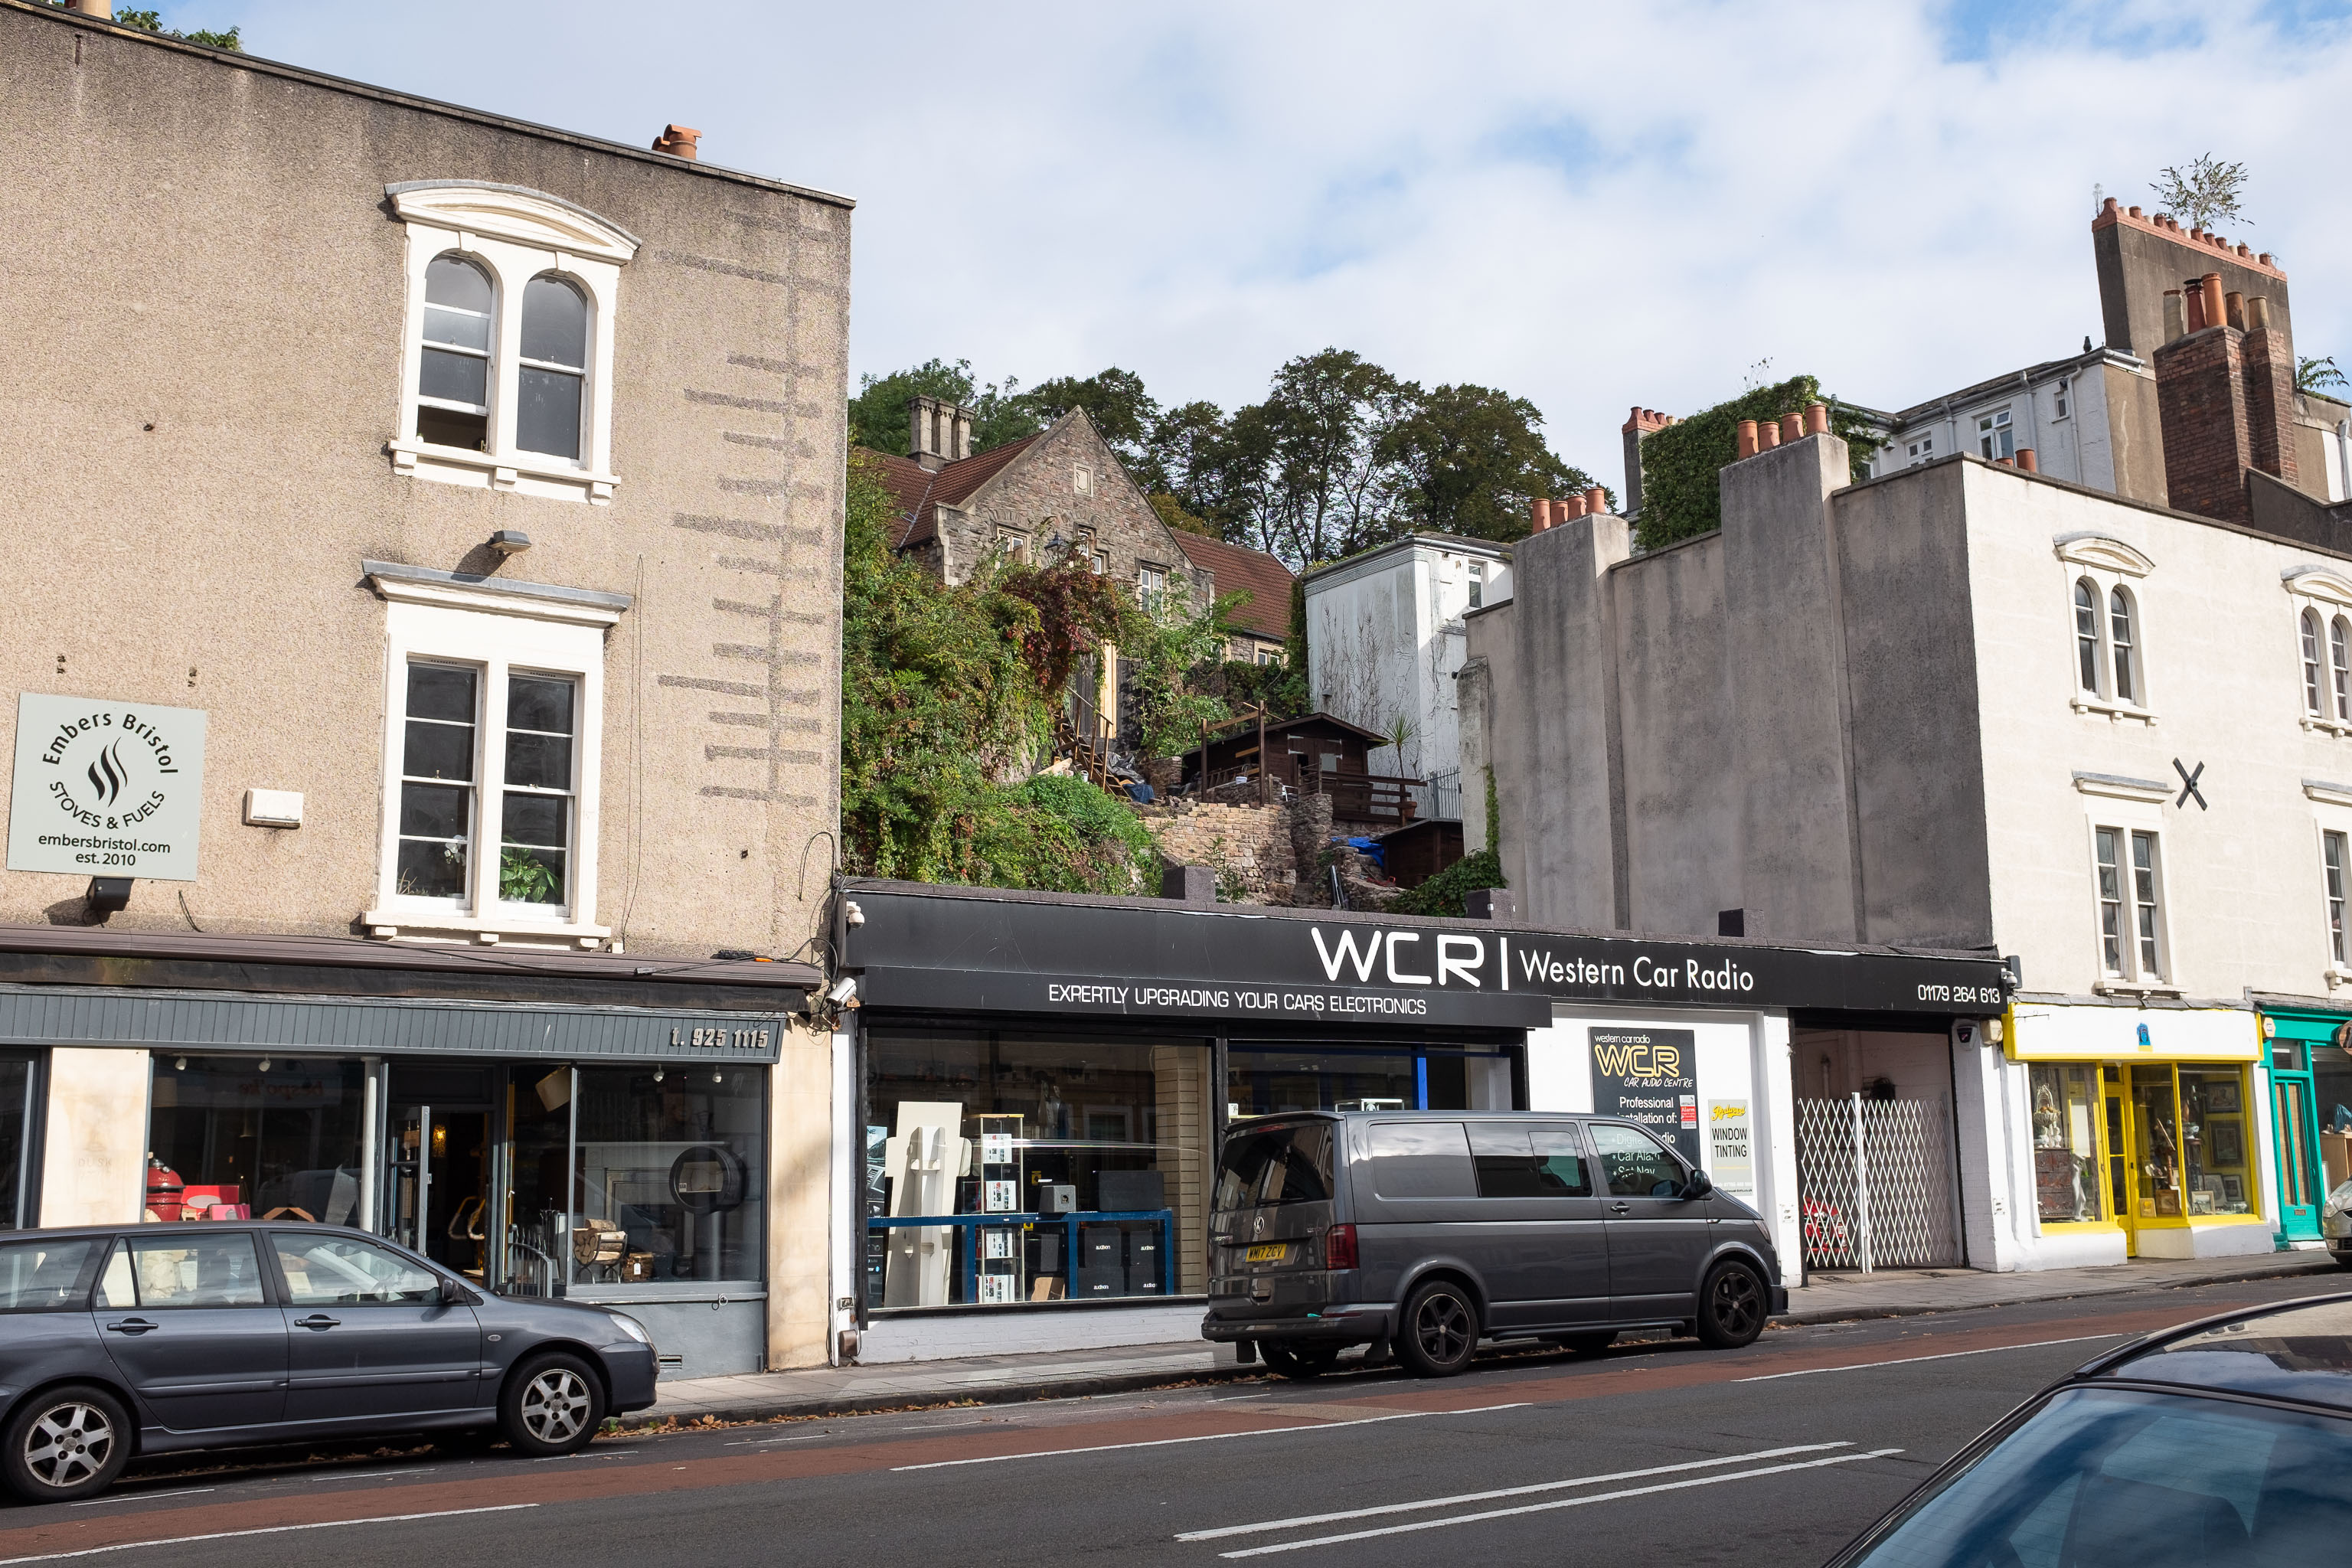 WCR
Have I ever looked up and noticed the view above Western Car Radio, which looks like perhaps the terraced back garden of St George's Primary? If I...